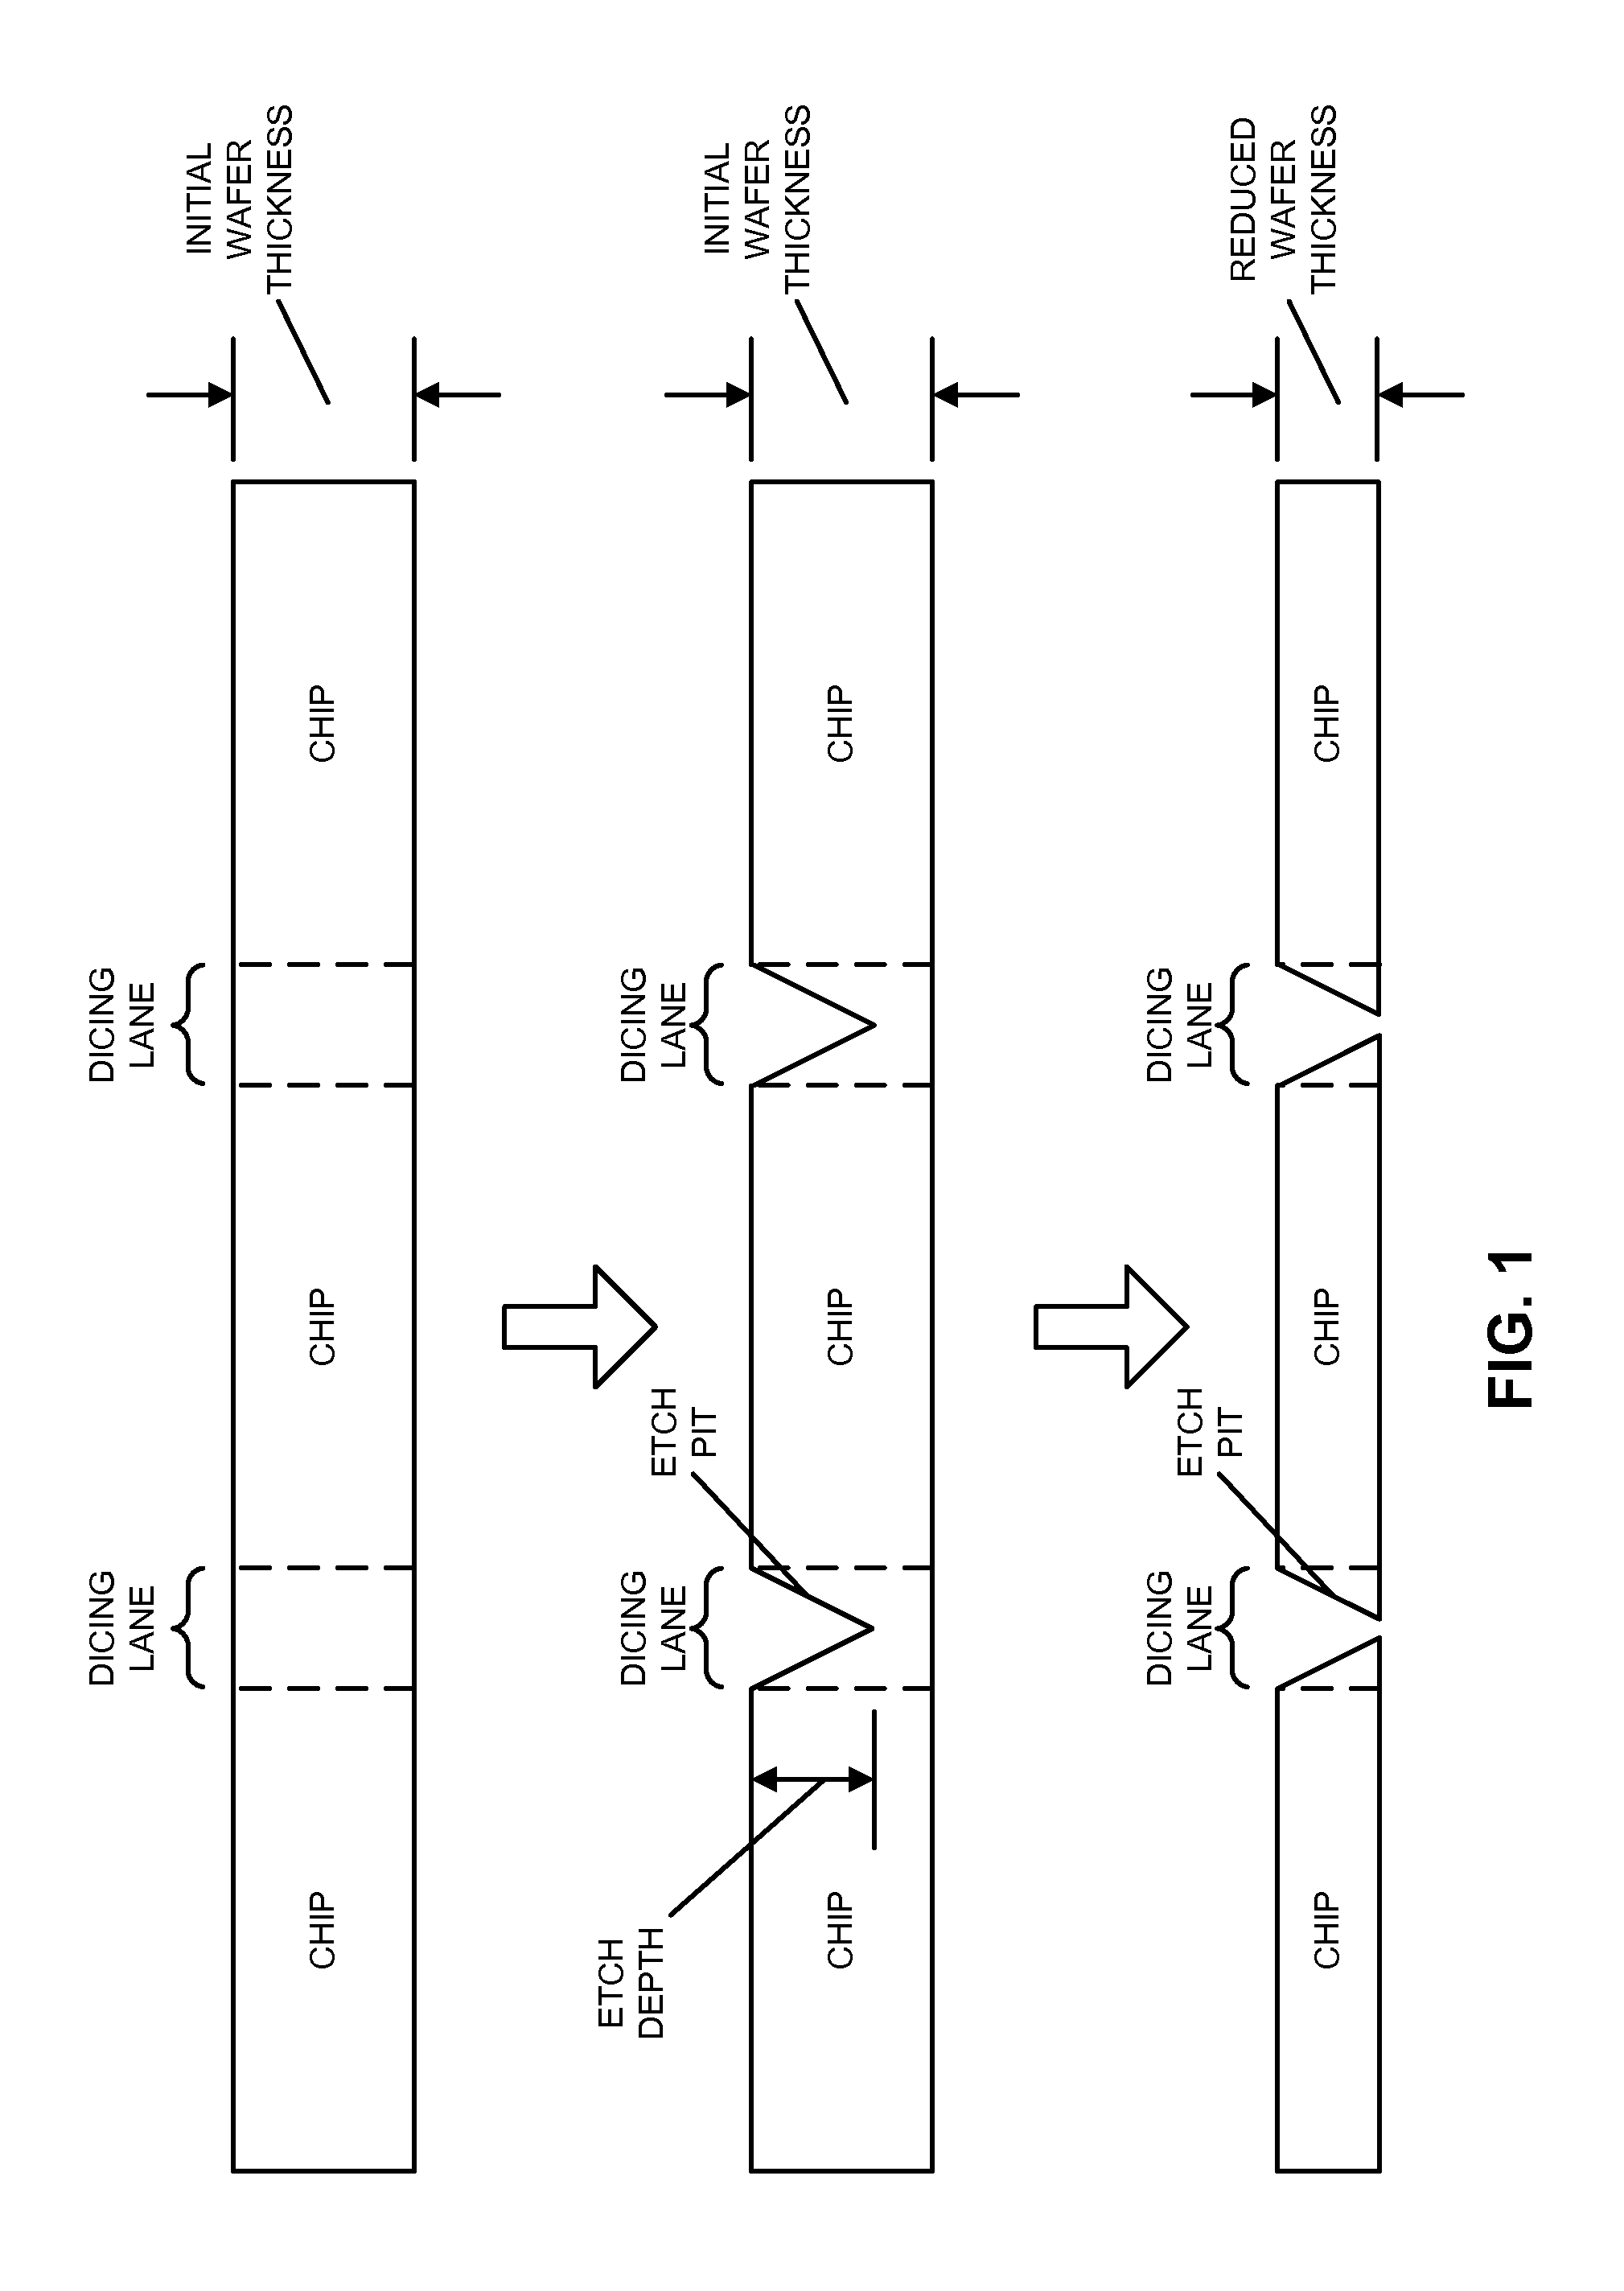 Batch process for three-dimensional integration